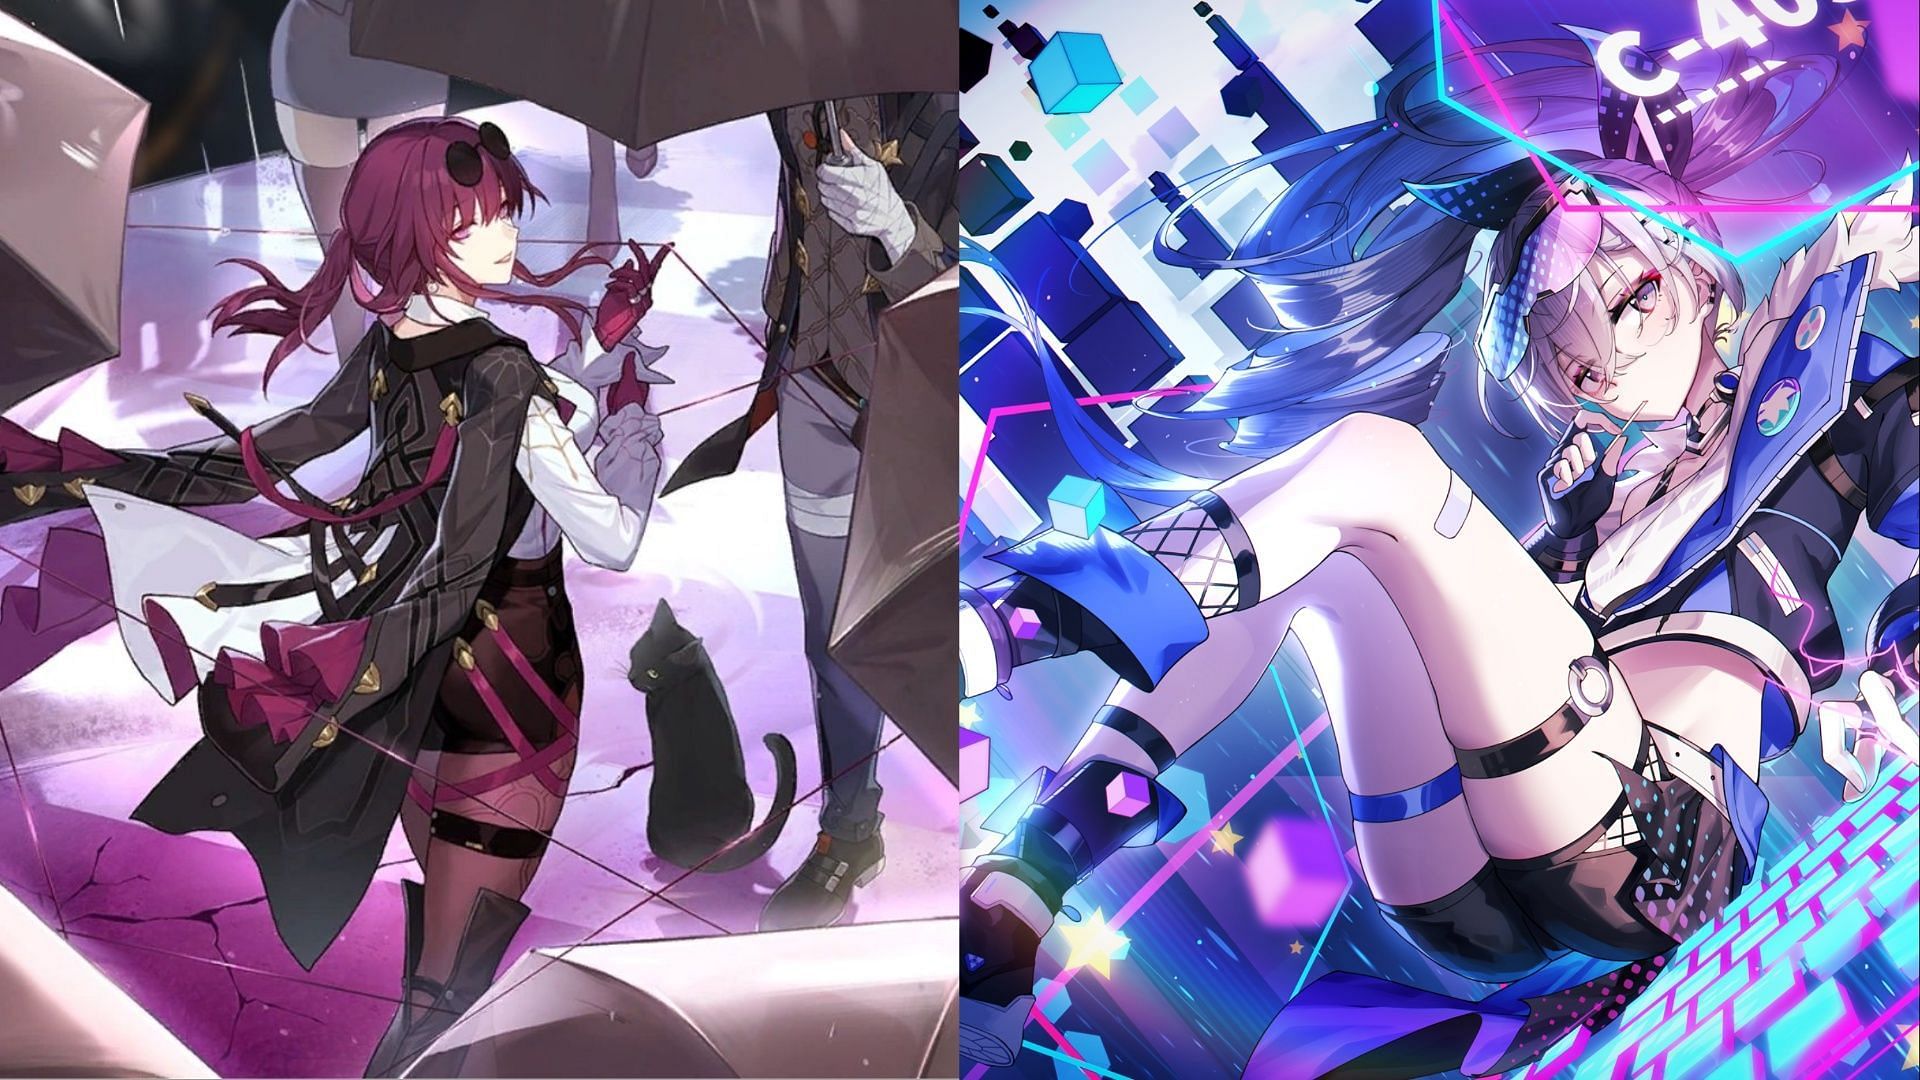 Honkai Star Rail players could get three new banners very soon (Images via MiHoYo)